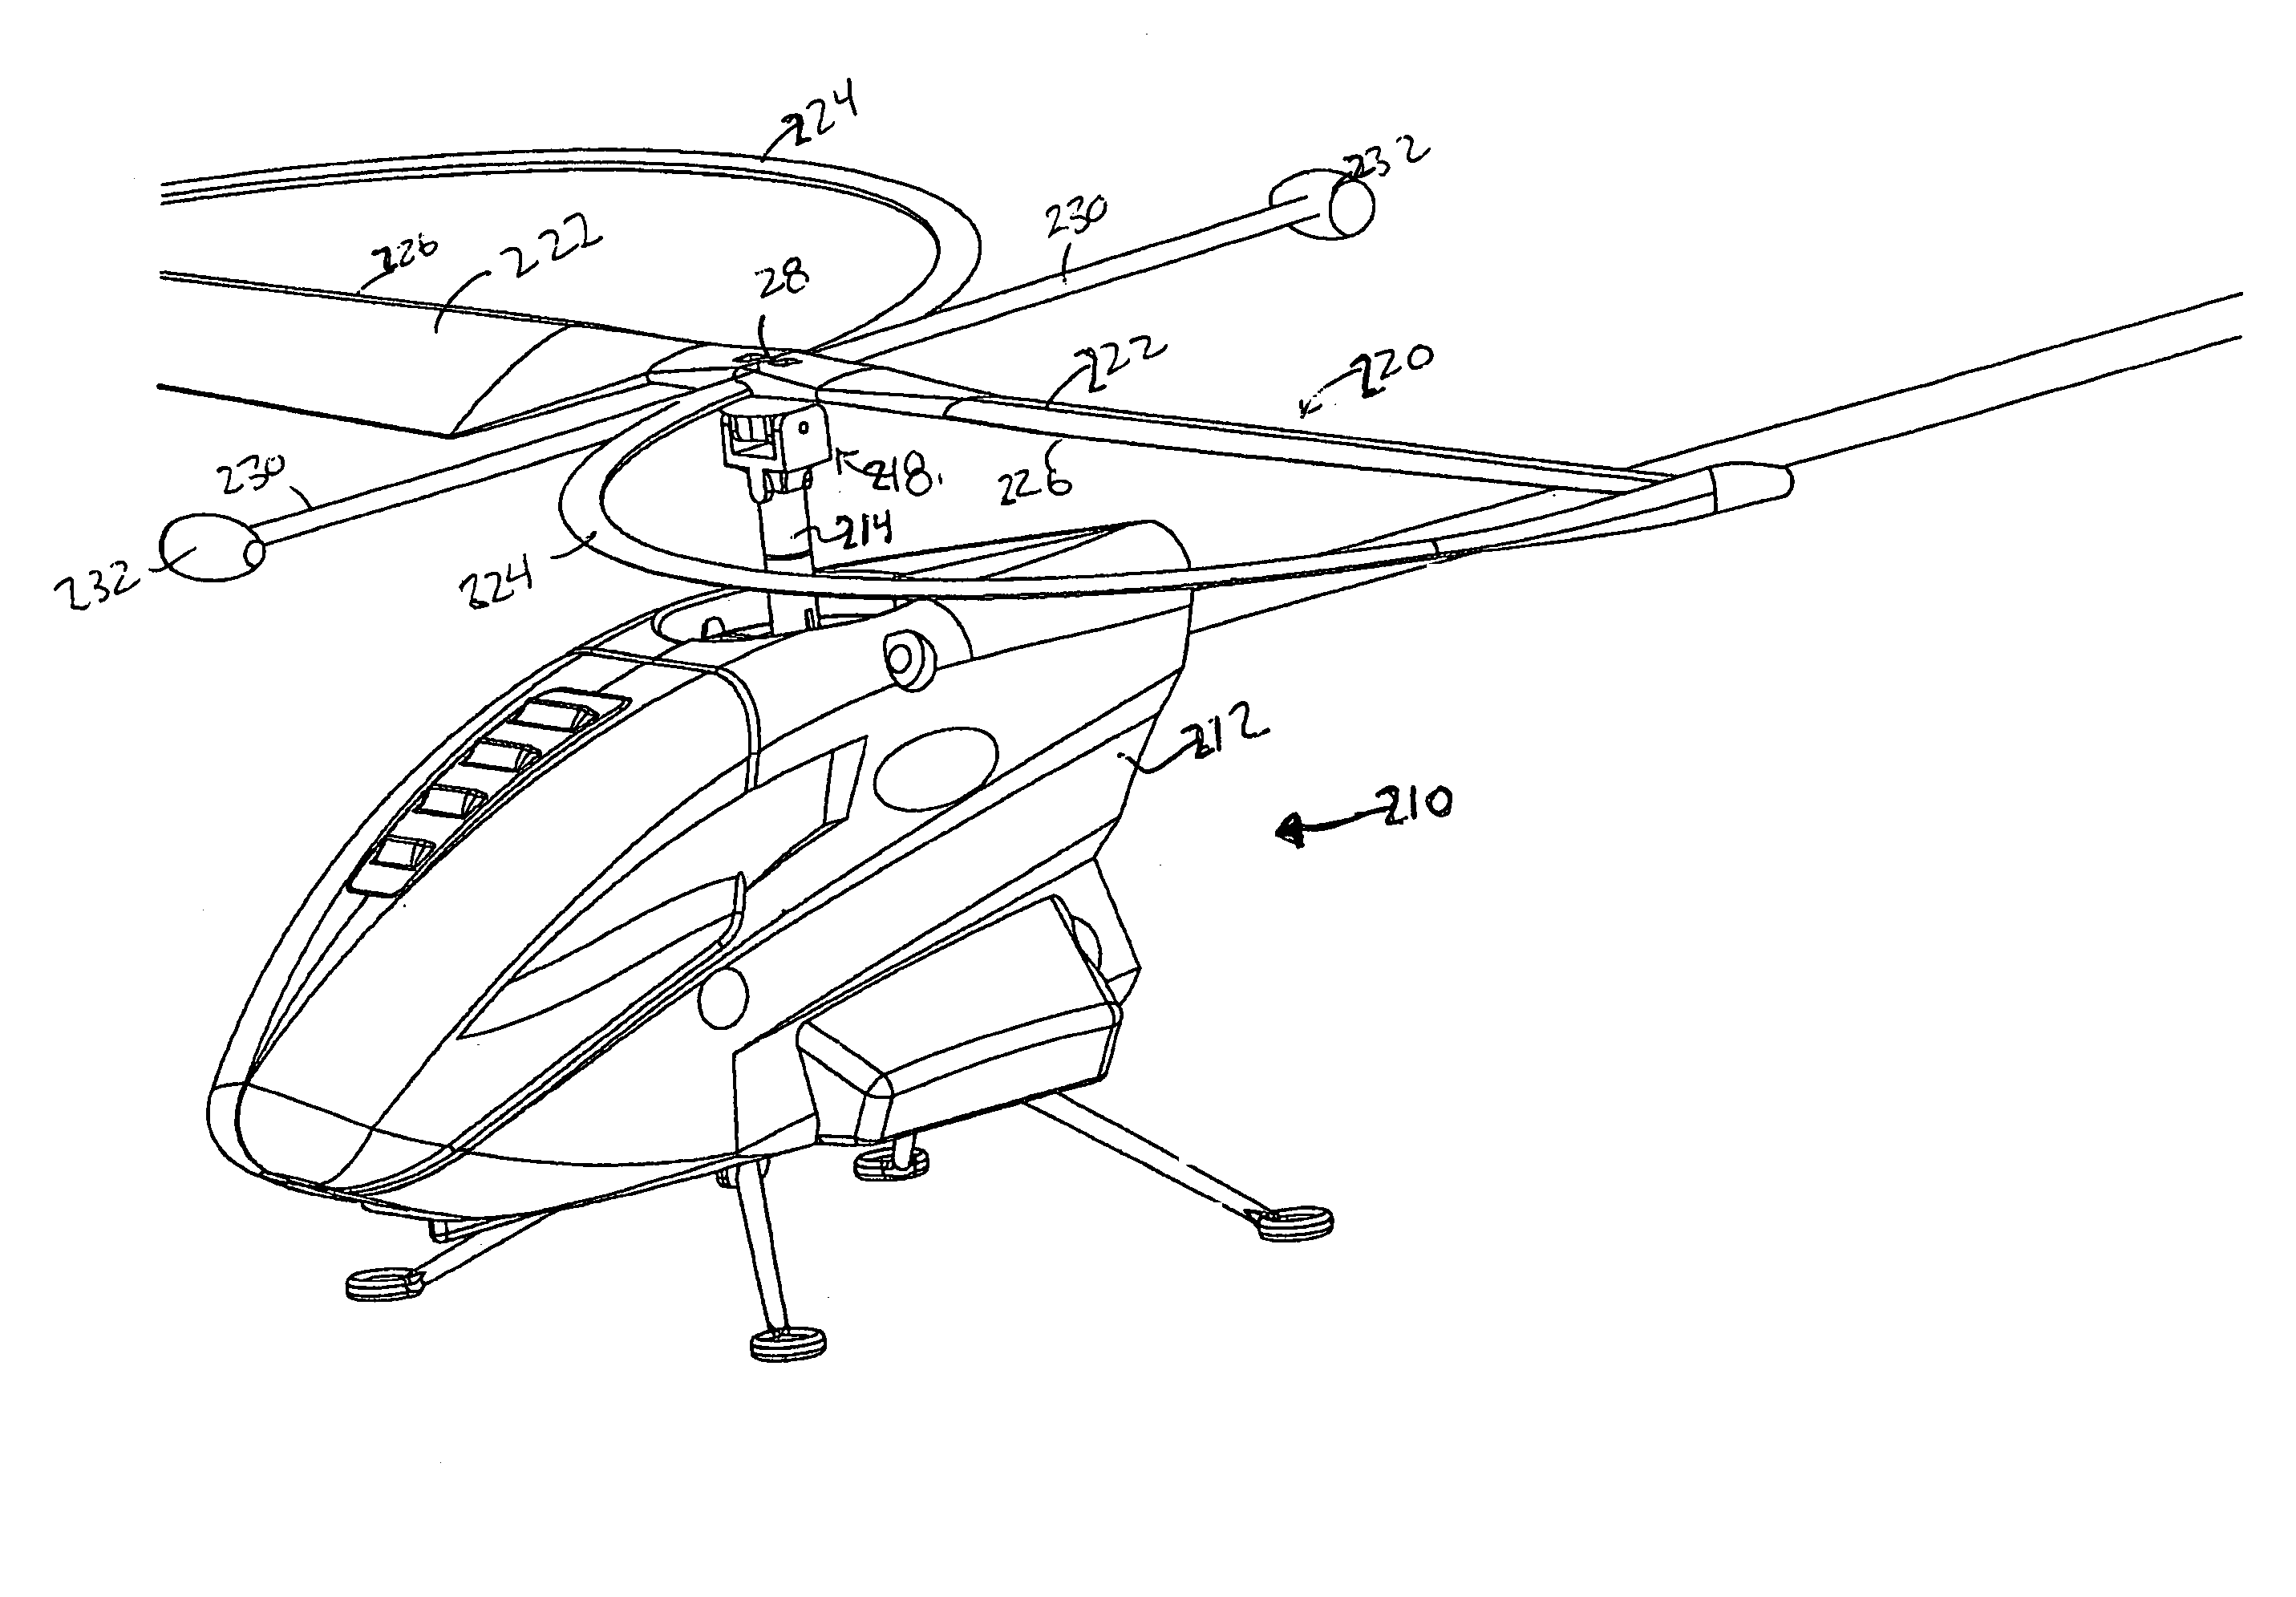 Propellers and propeller related vehicles